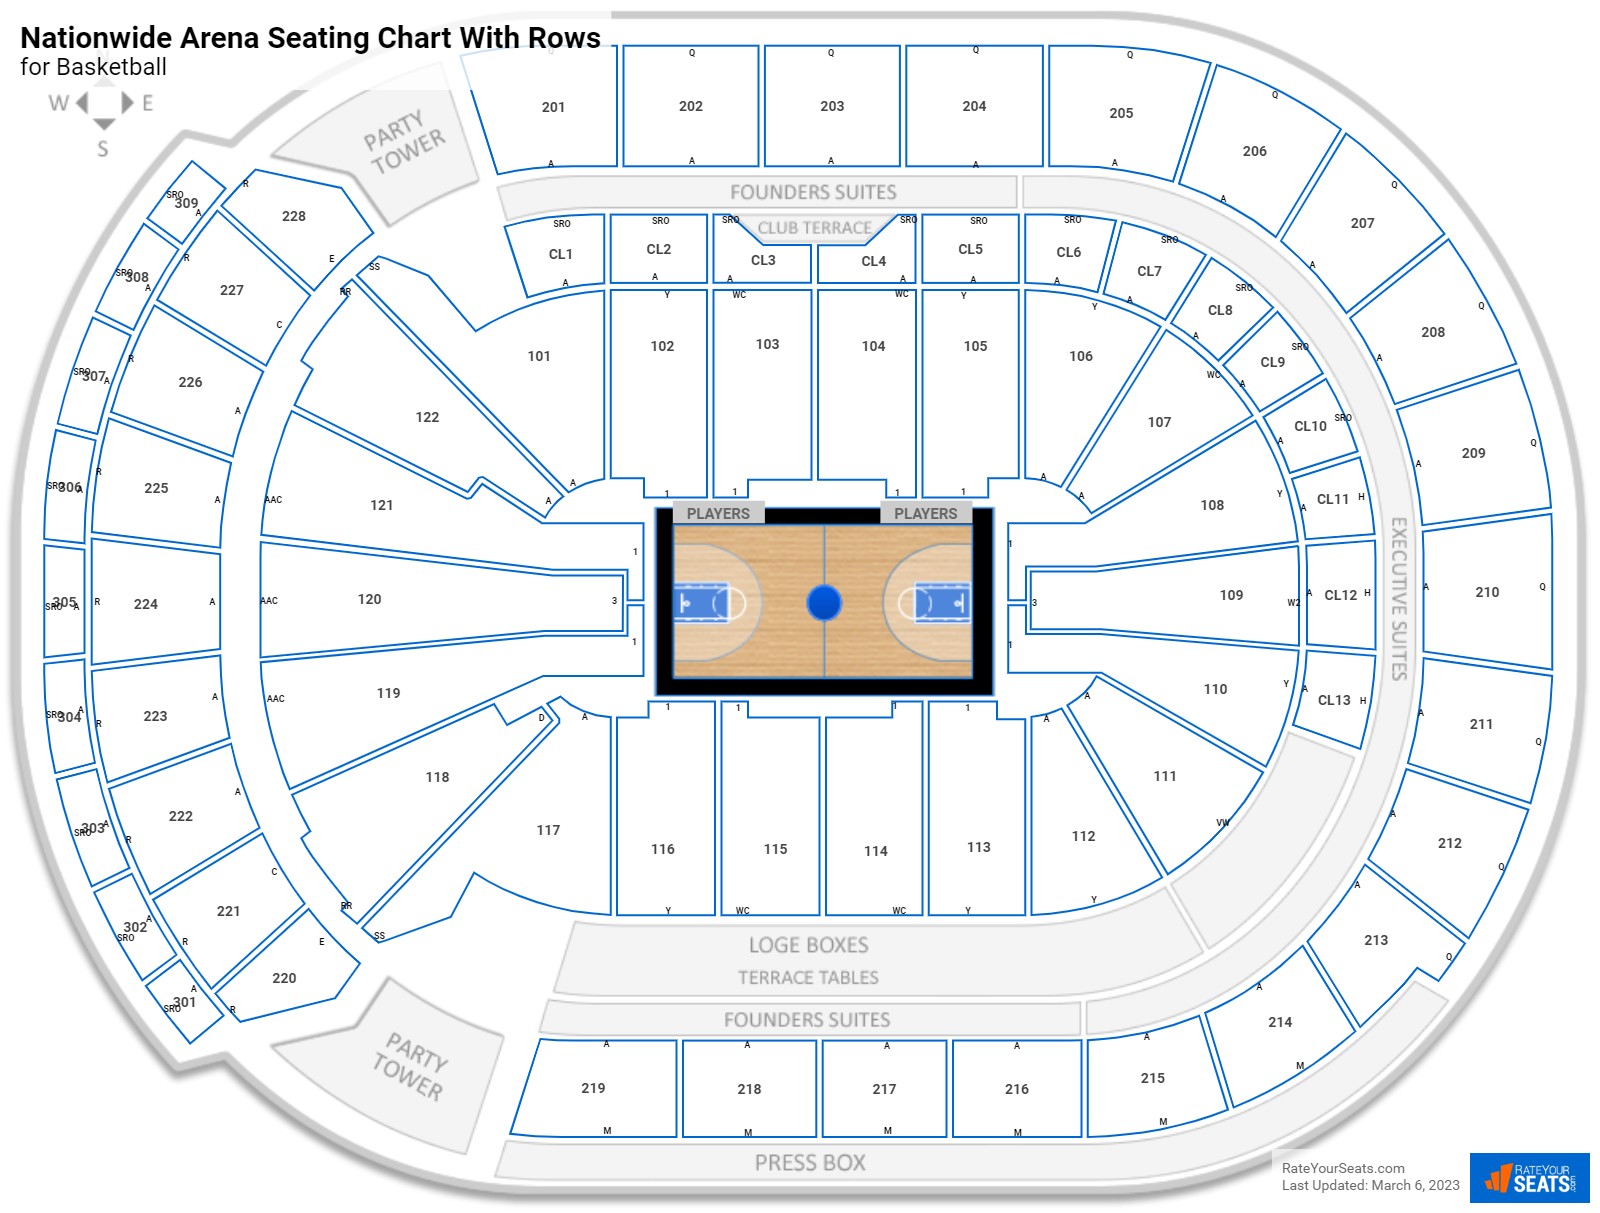 Nationwide Arena Seating Charts Views Games Answers.